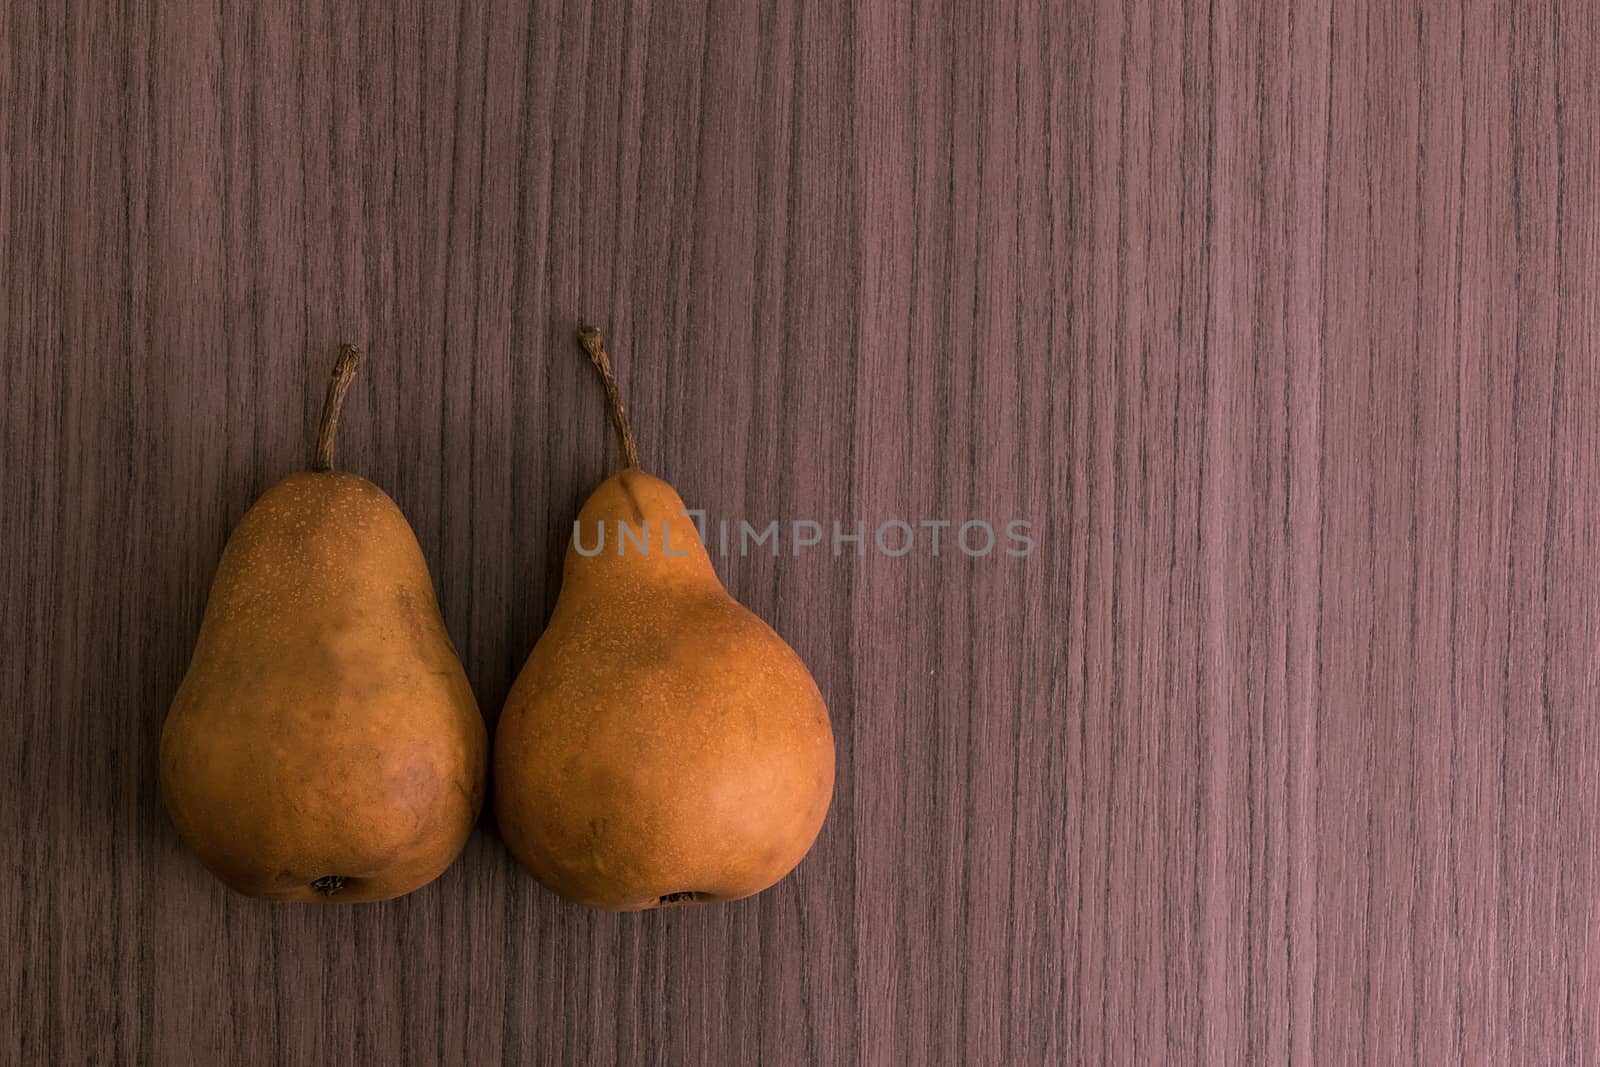 Two pears by dalomo84